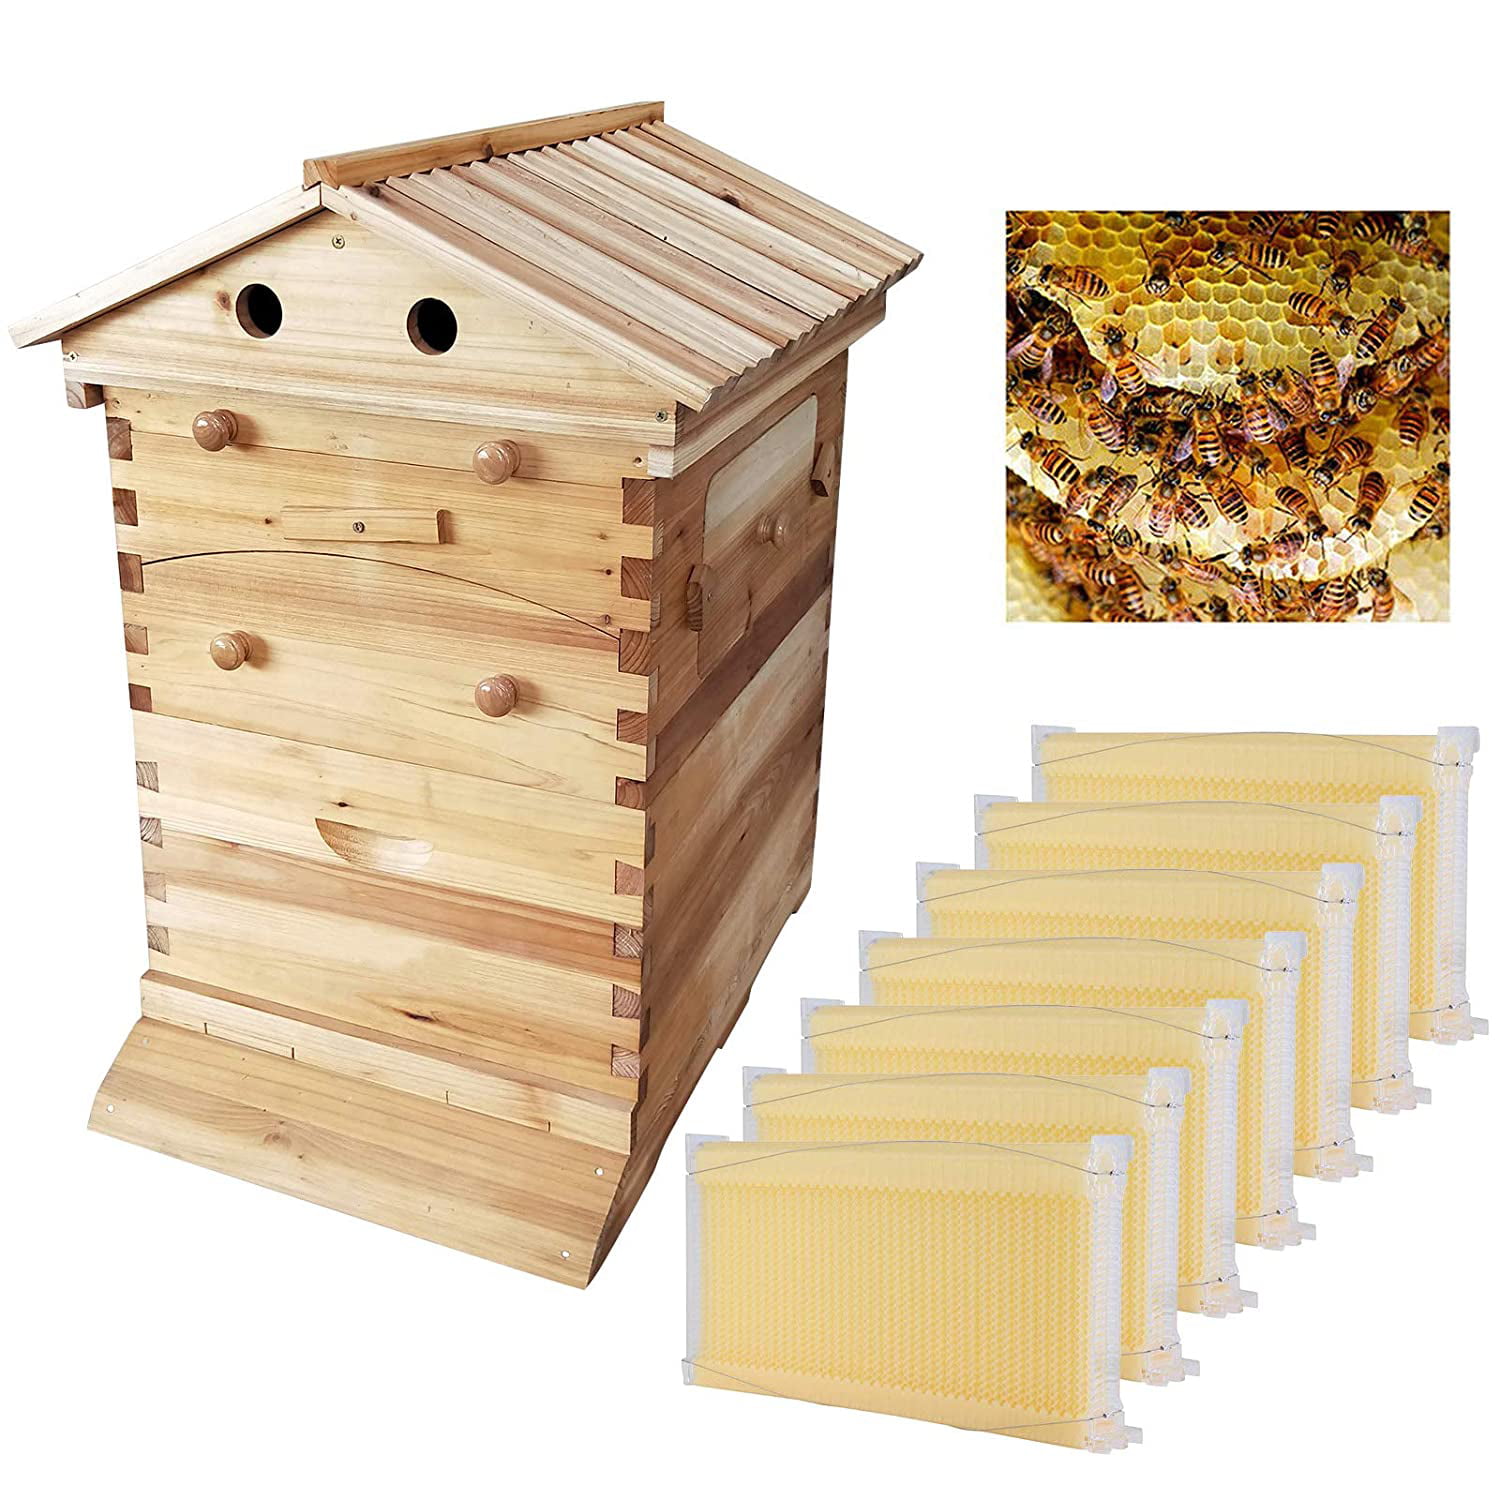 Upgraded Beehive Brood Box Bee House OR 7 Pcs Free Honey Hive Frames US Stock 